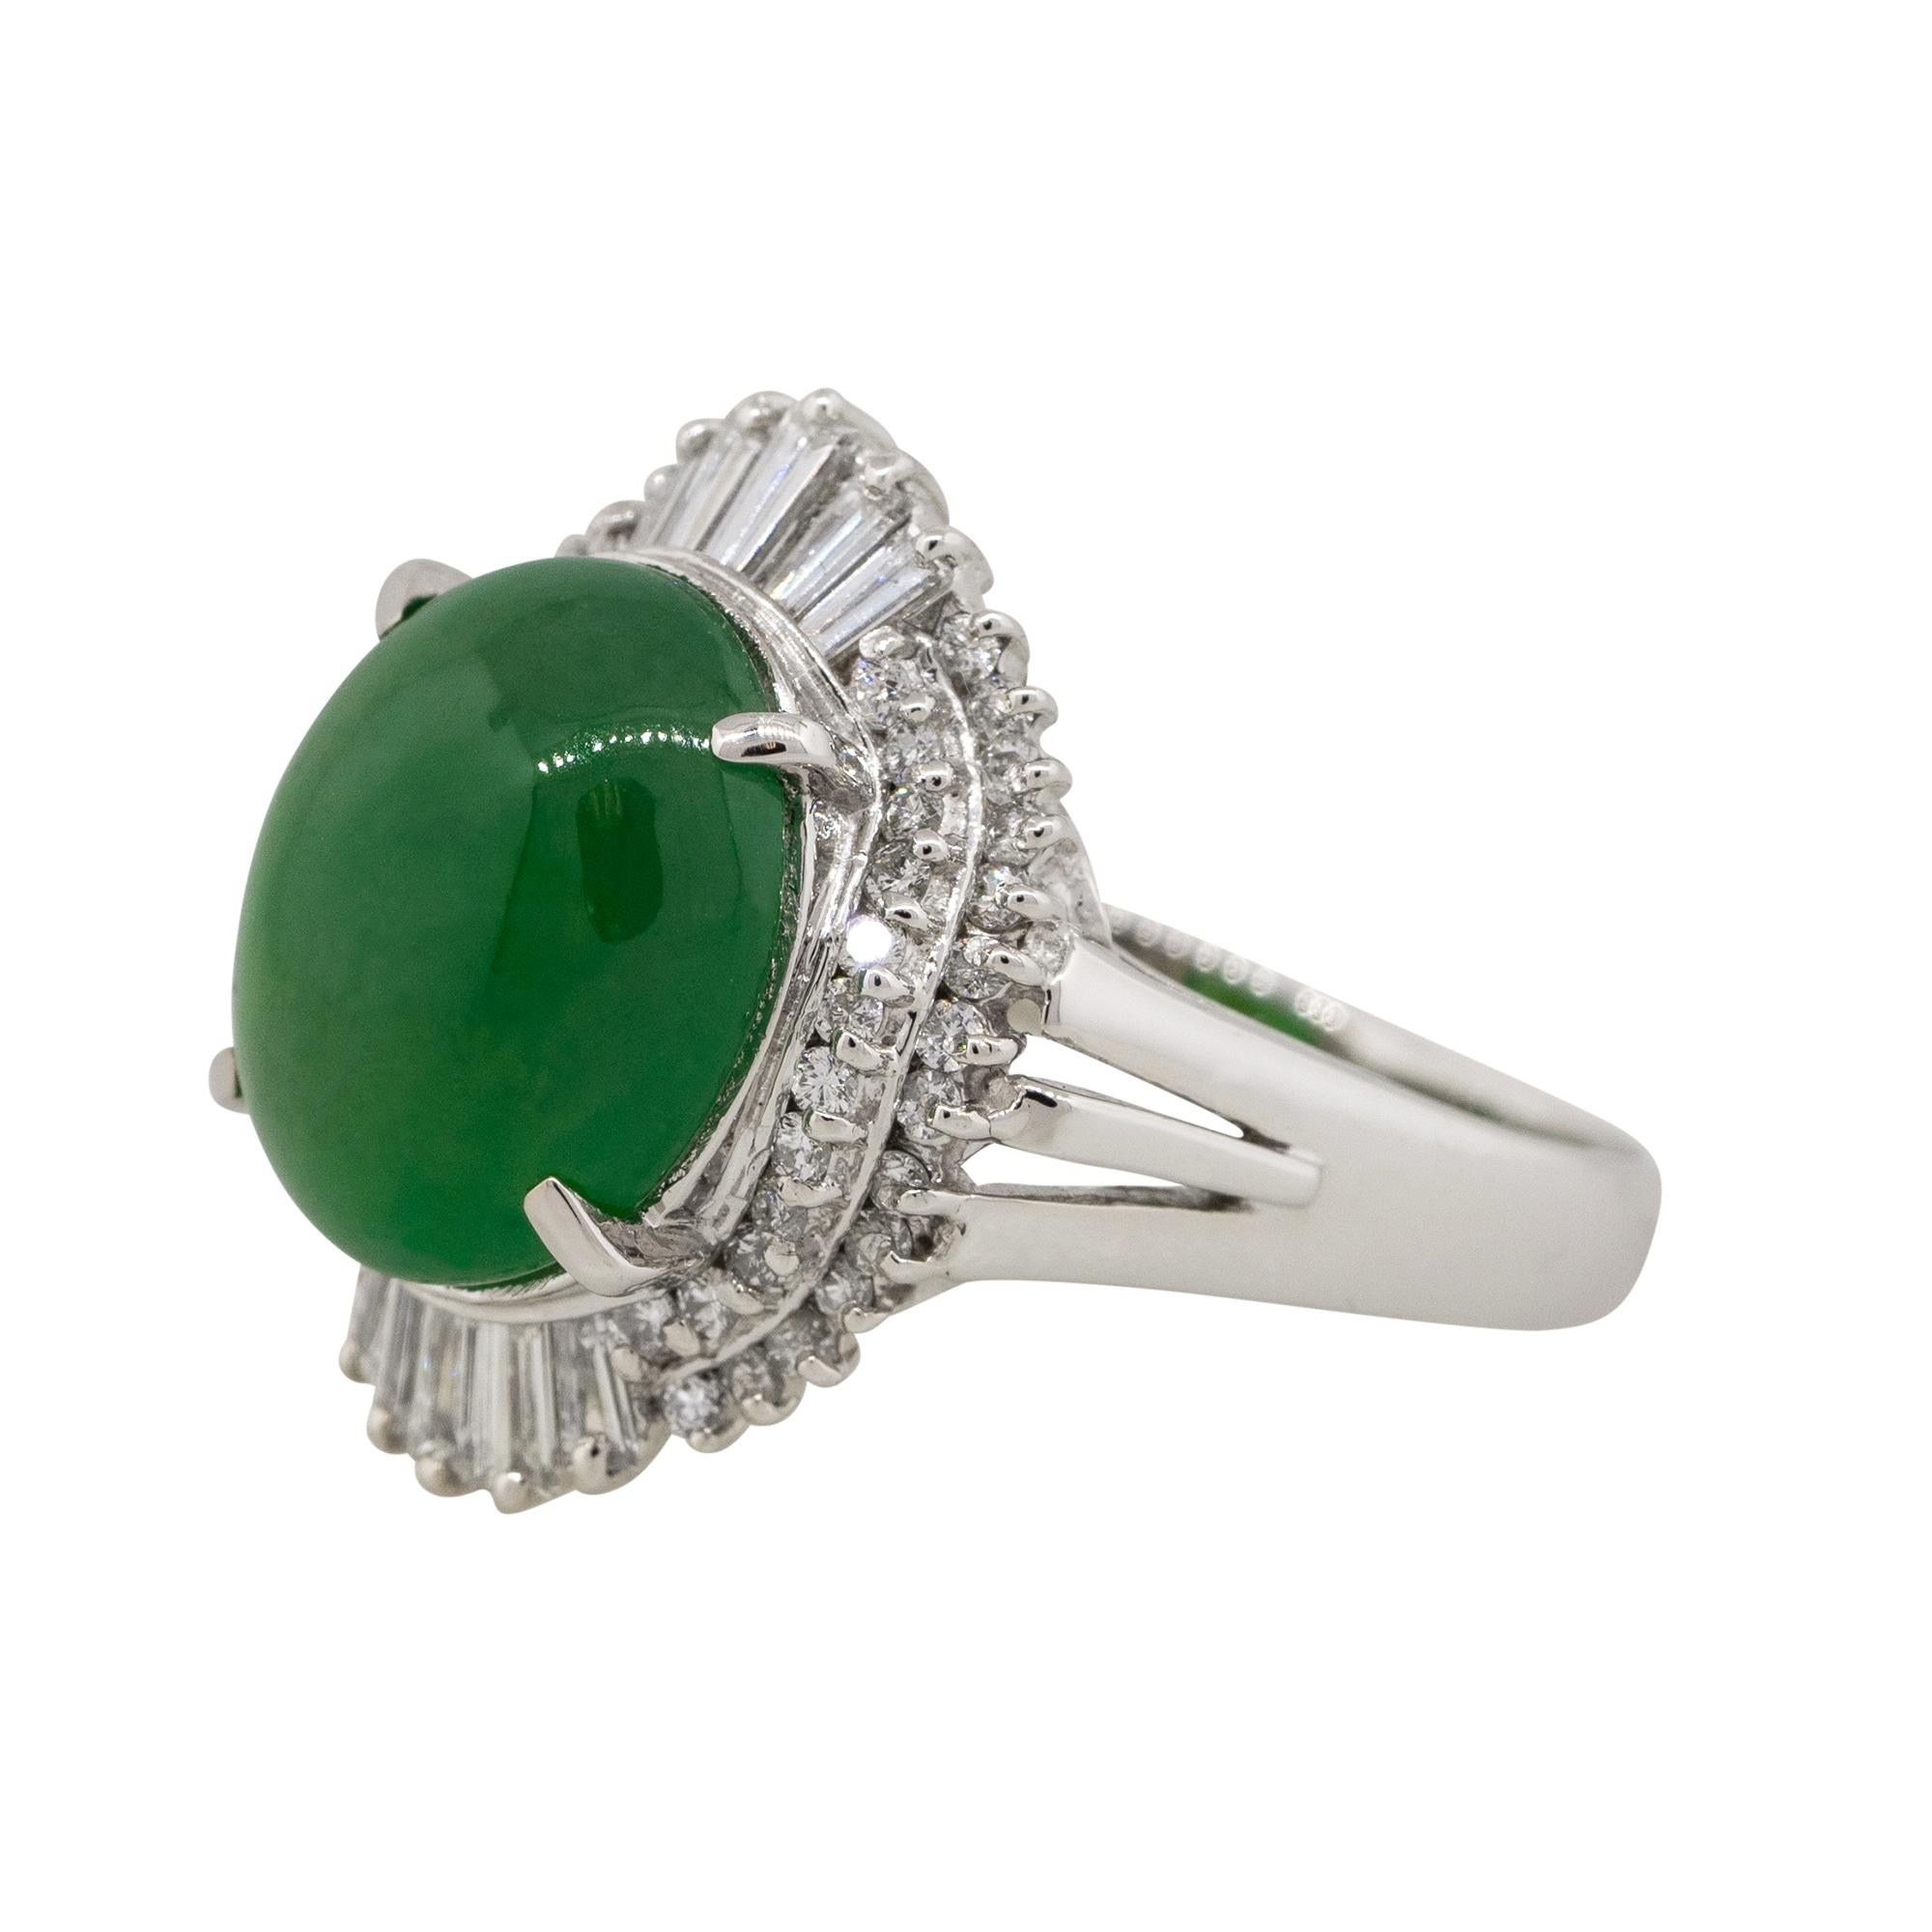 Material: Platinum
Gemstone details: Approx. 5.45ctw Jade cabochon center gemstone
Diamond details: Approx. 0.61ctw of round & baguette cut Diamonds. Diamonds are G/H in color and VS in clarity
Ring Size: 7
Ring Measurements: 0.75